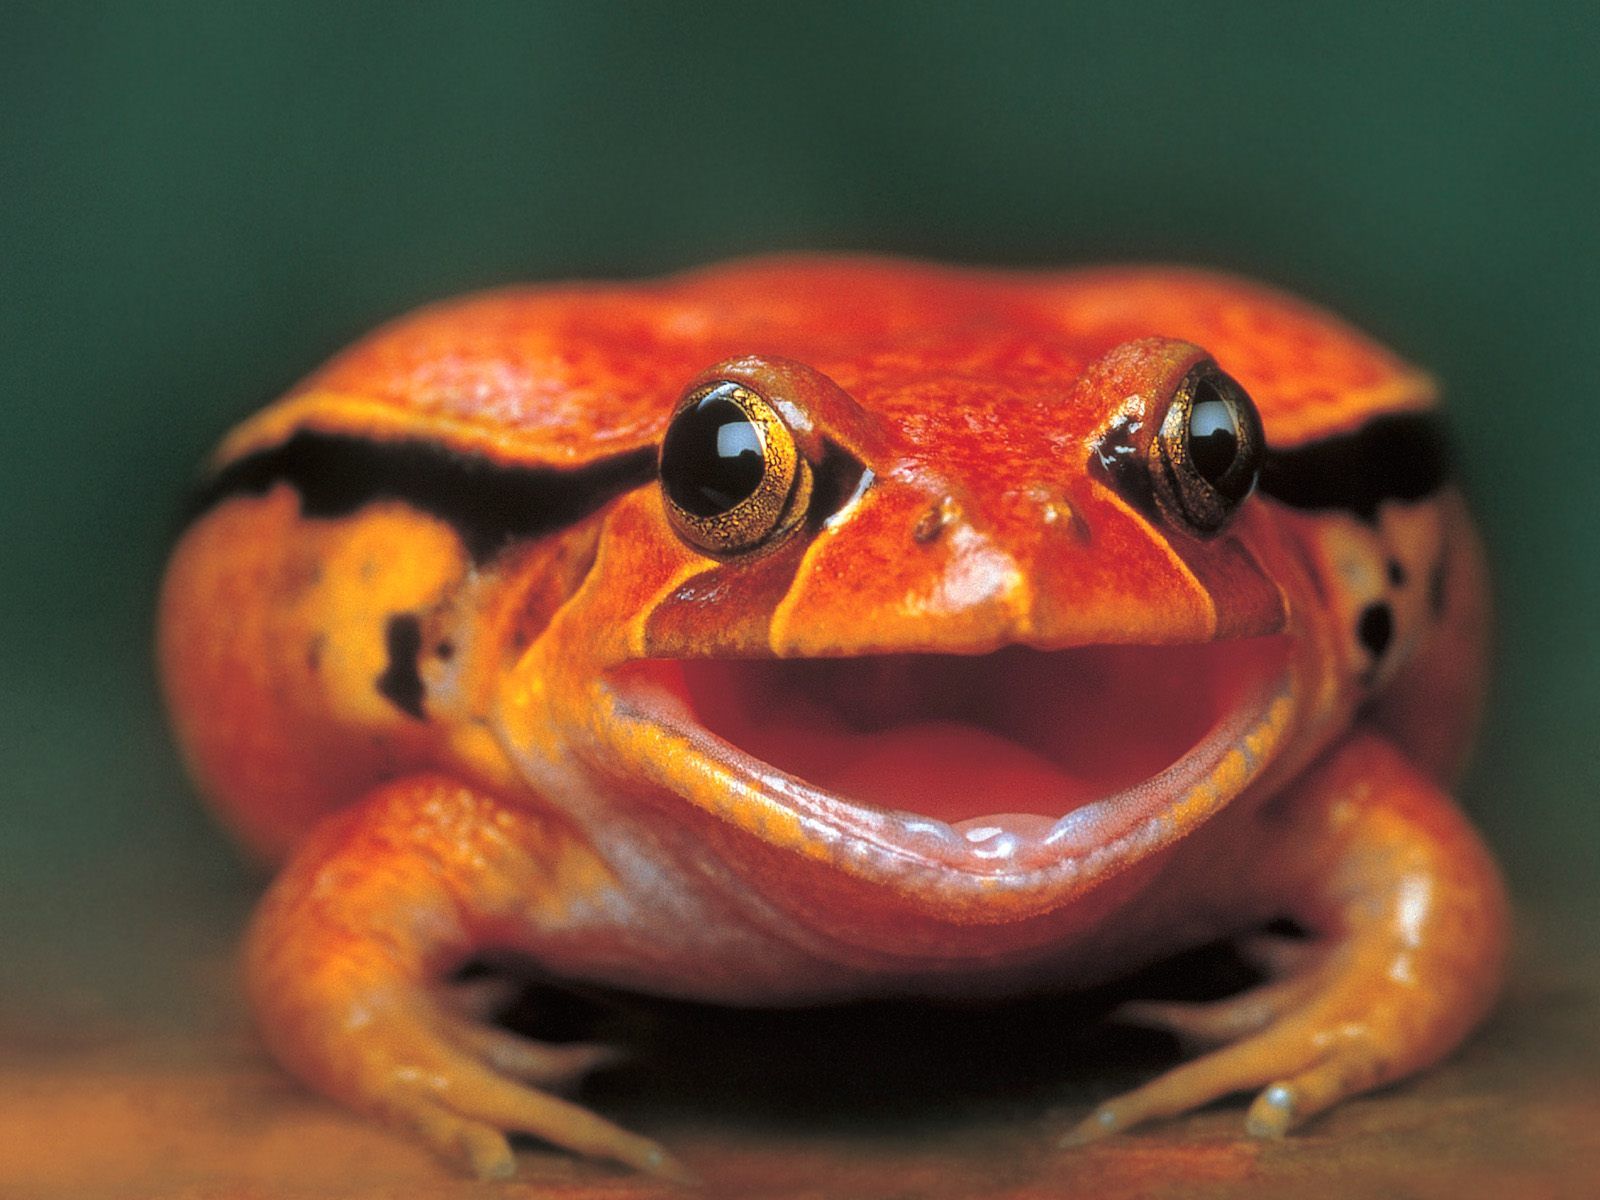 Big Red Frog - Nice Close-Up | Frogs | Pinterest | Frogs, Amphibians ...